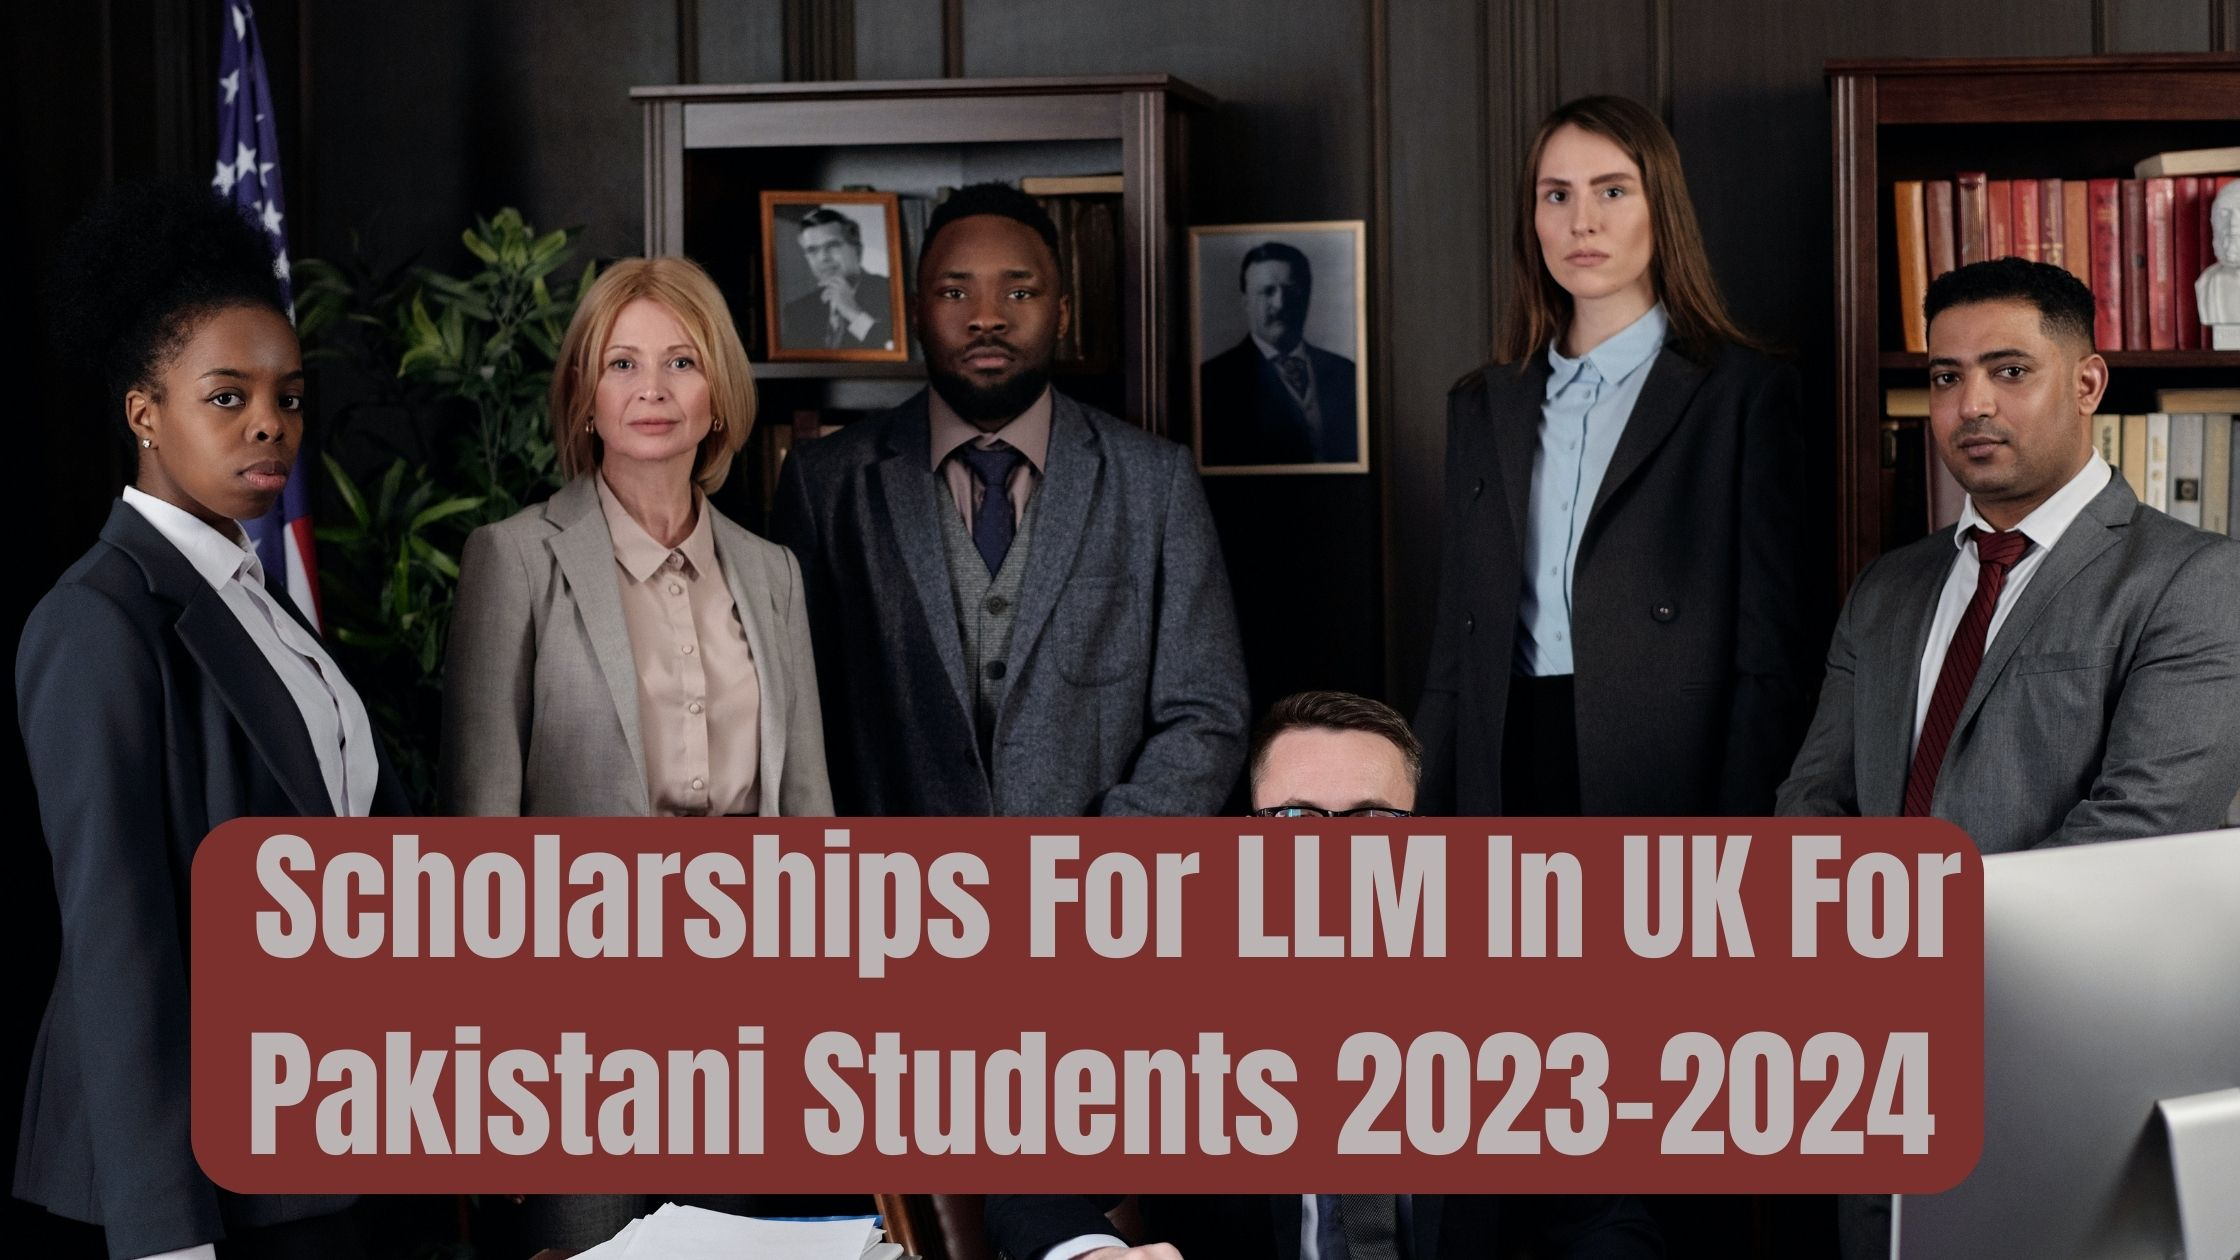 Scholarships For LLM In UK For Pakistani Students 2023-2024